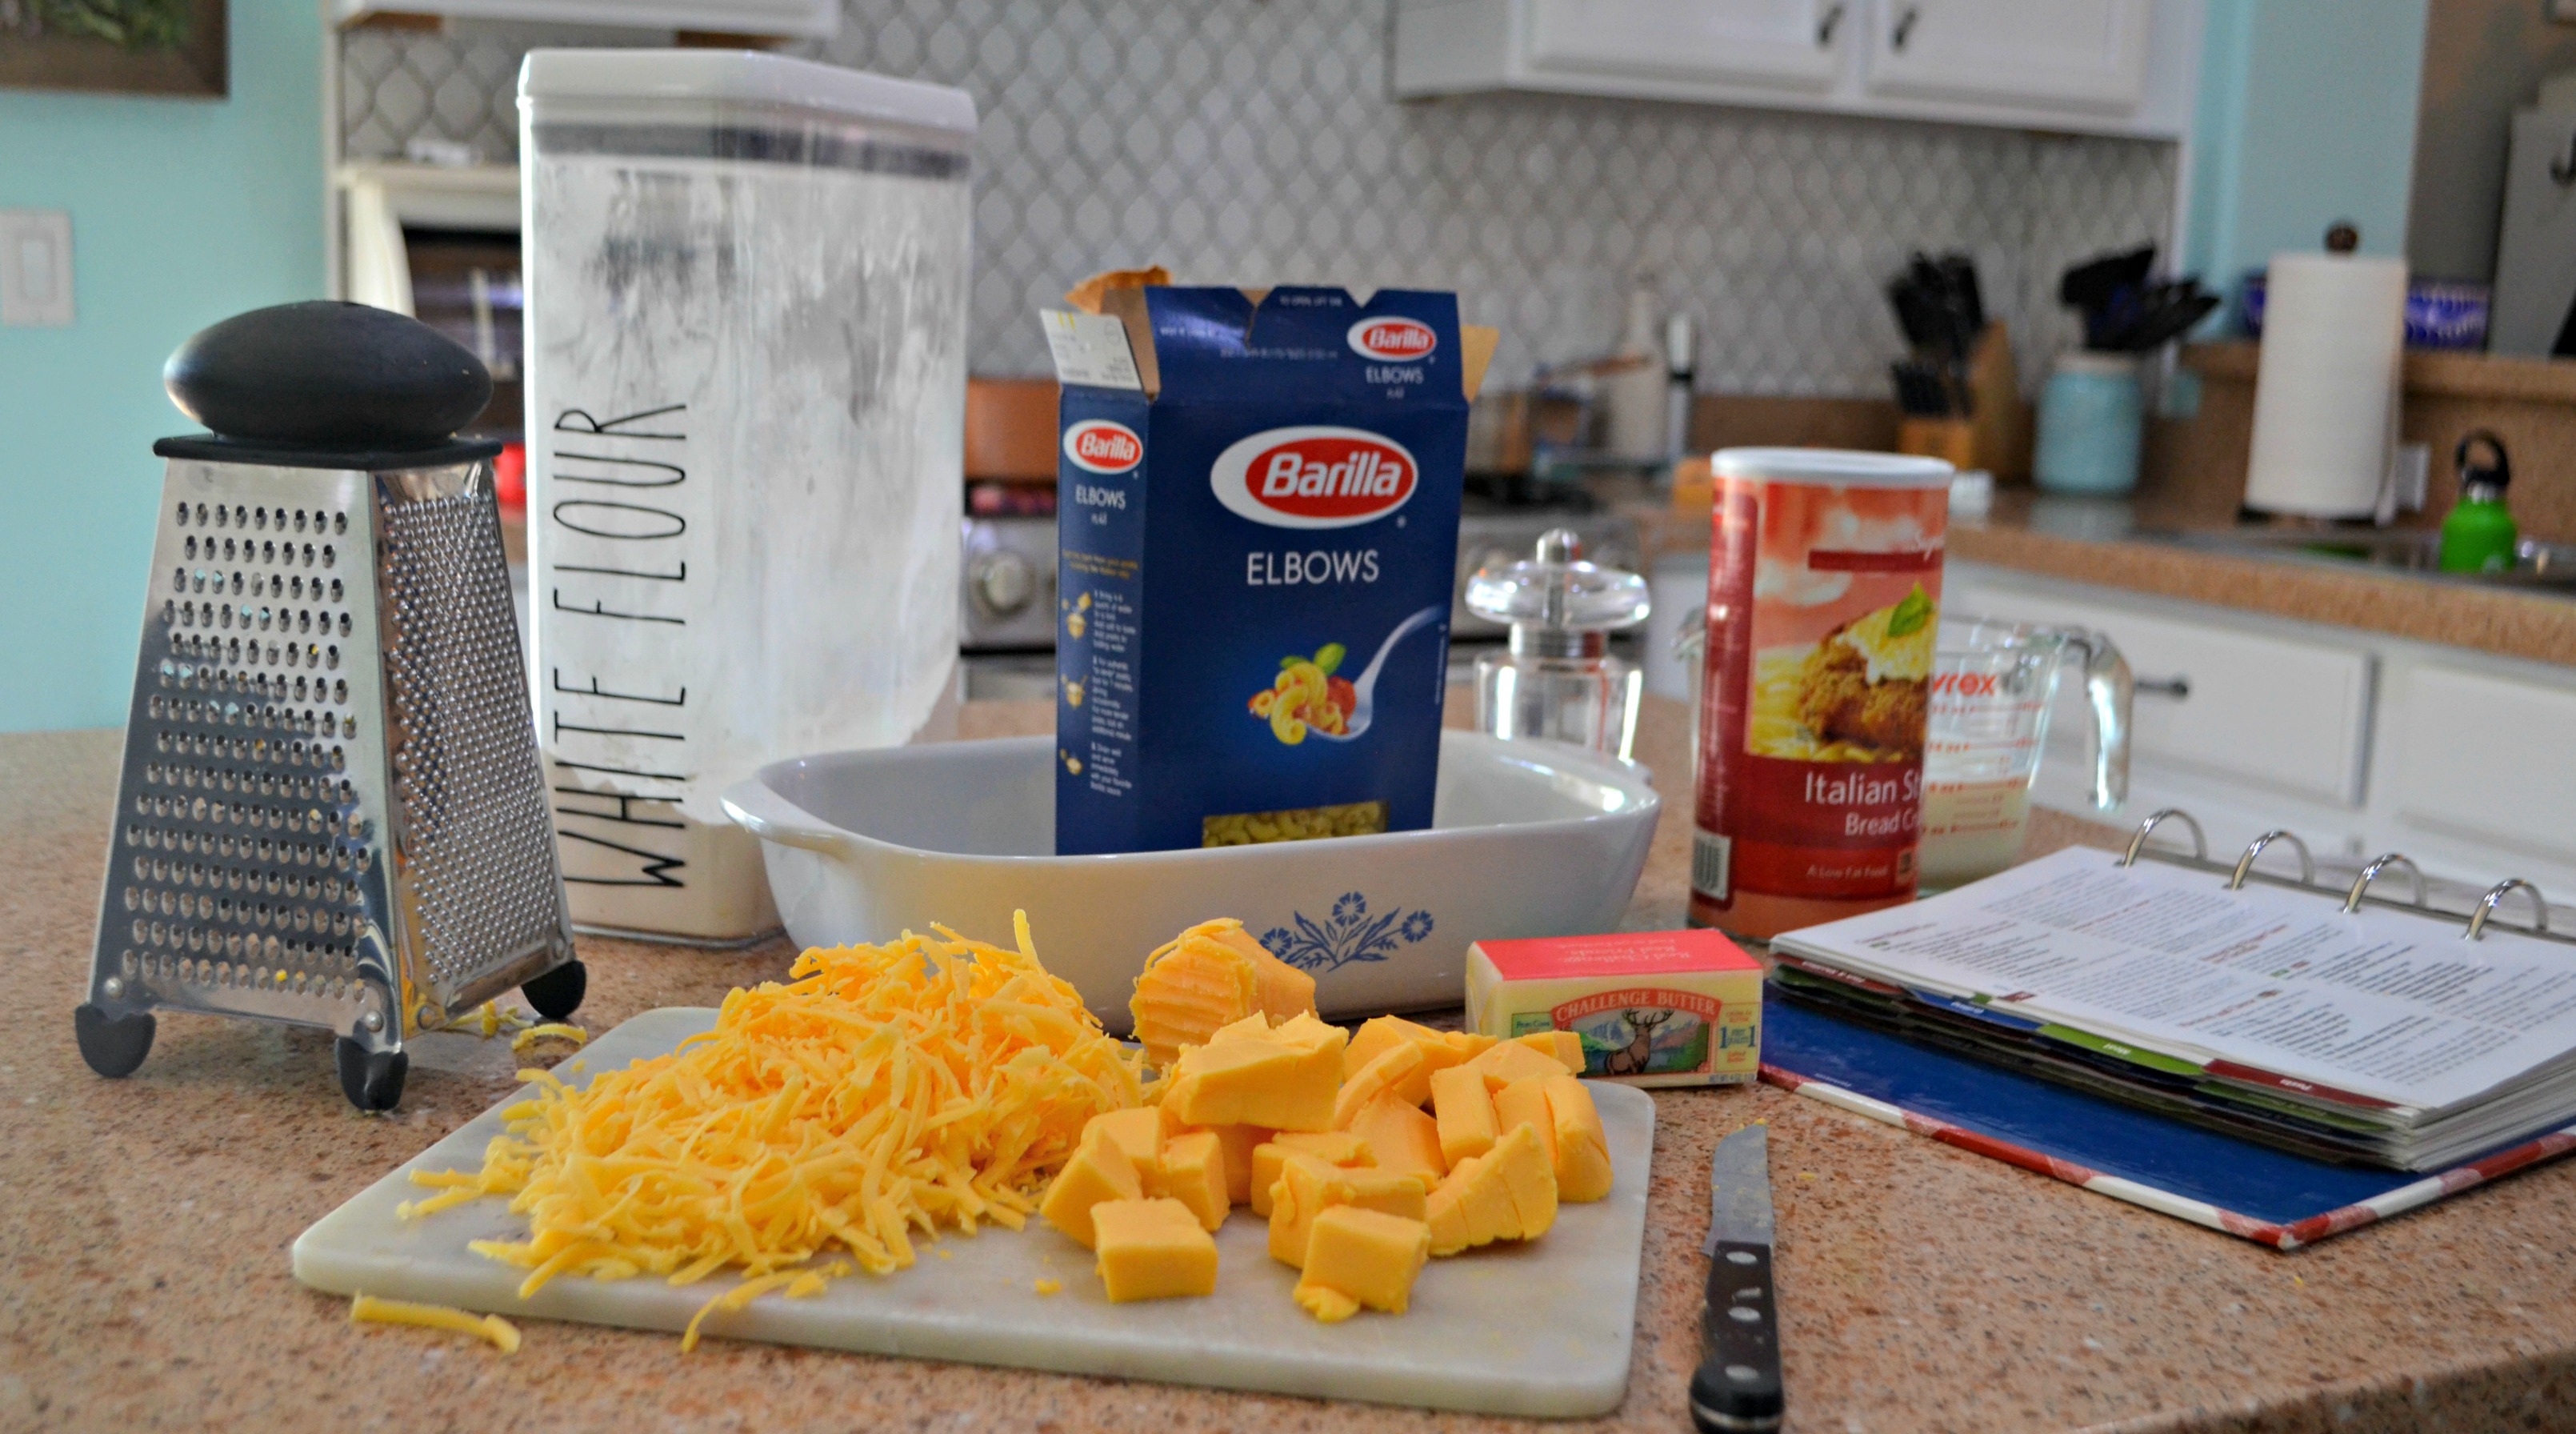 Classic Mac and Cheese just like my mom made! – Ingredients on the counter